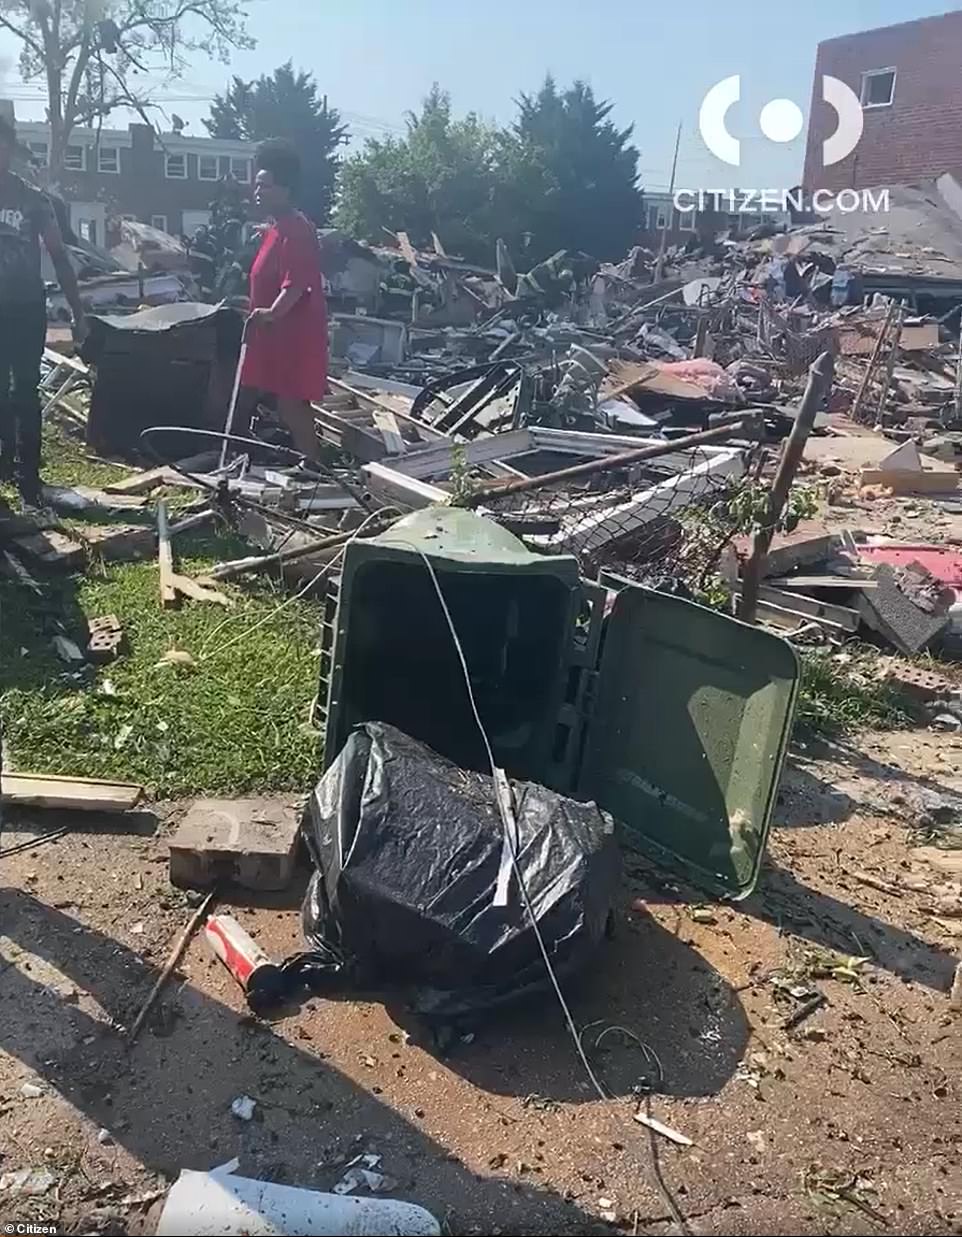 At least one person has been killed and another two are in a critical condition after a 'major explosion' destroyed at least three homes in Baltimore and trapped victims, including children, under the rubble. Pictured: the scene